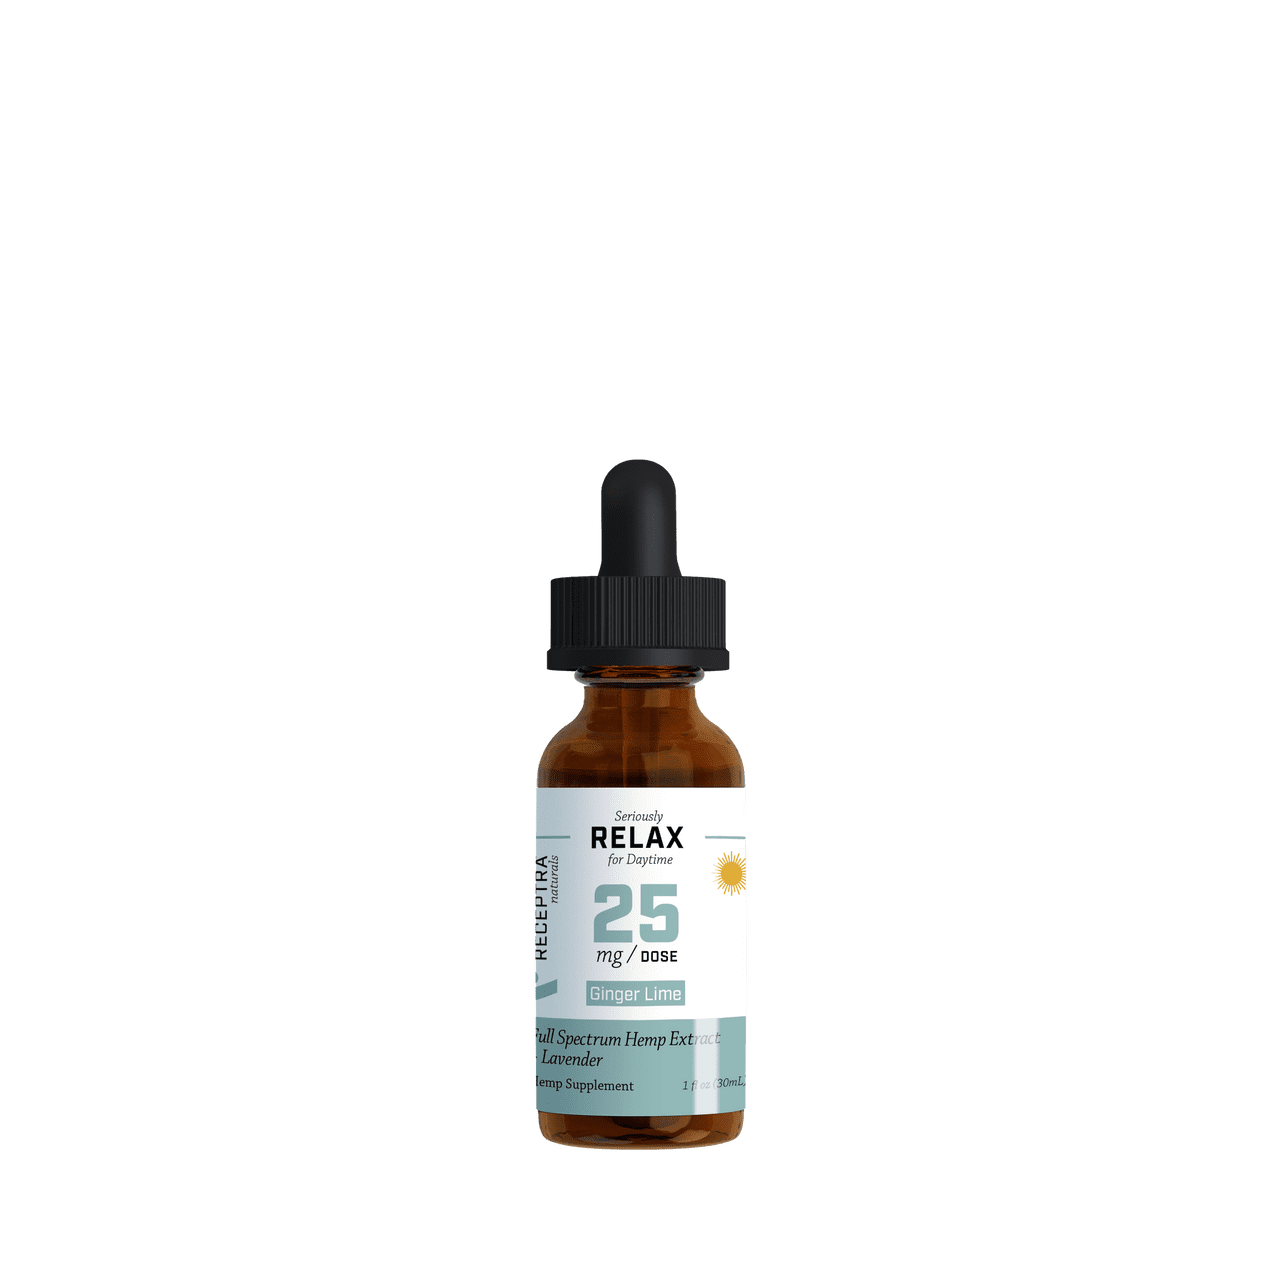 Receptra Seriously Relax + Lavender Tincture 25mg /dose image1